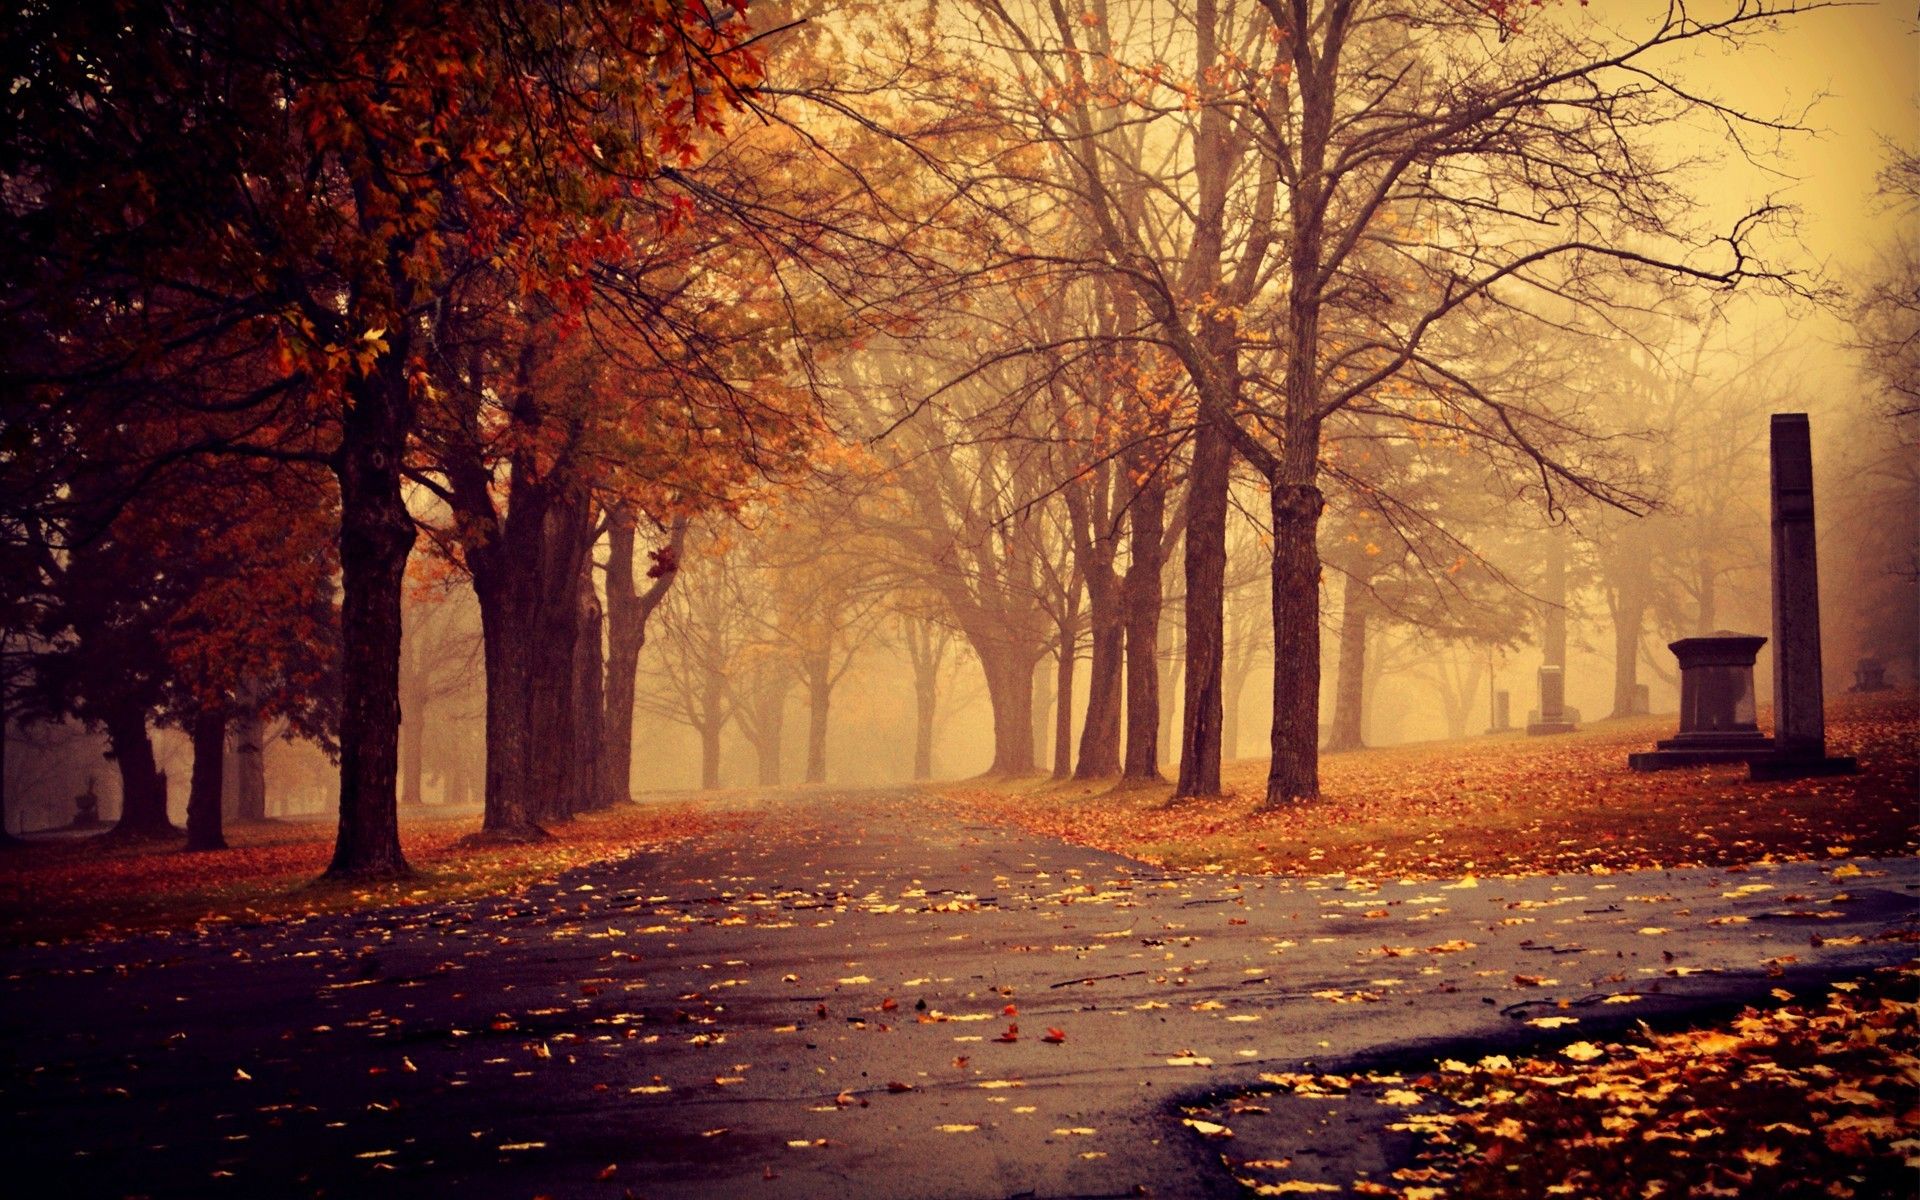 A foggy autumn day in a park with trees and leaves on the ground. - Vintage fall